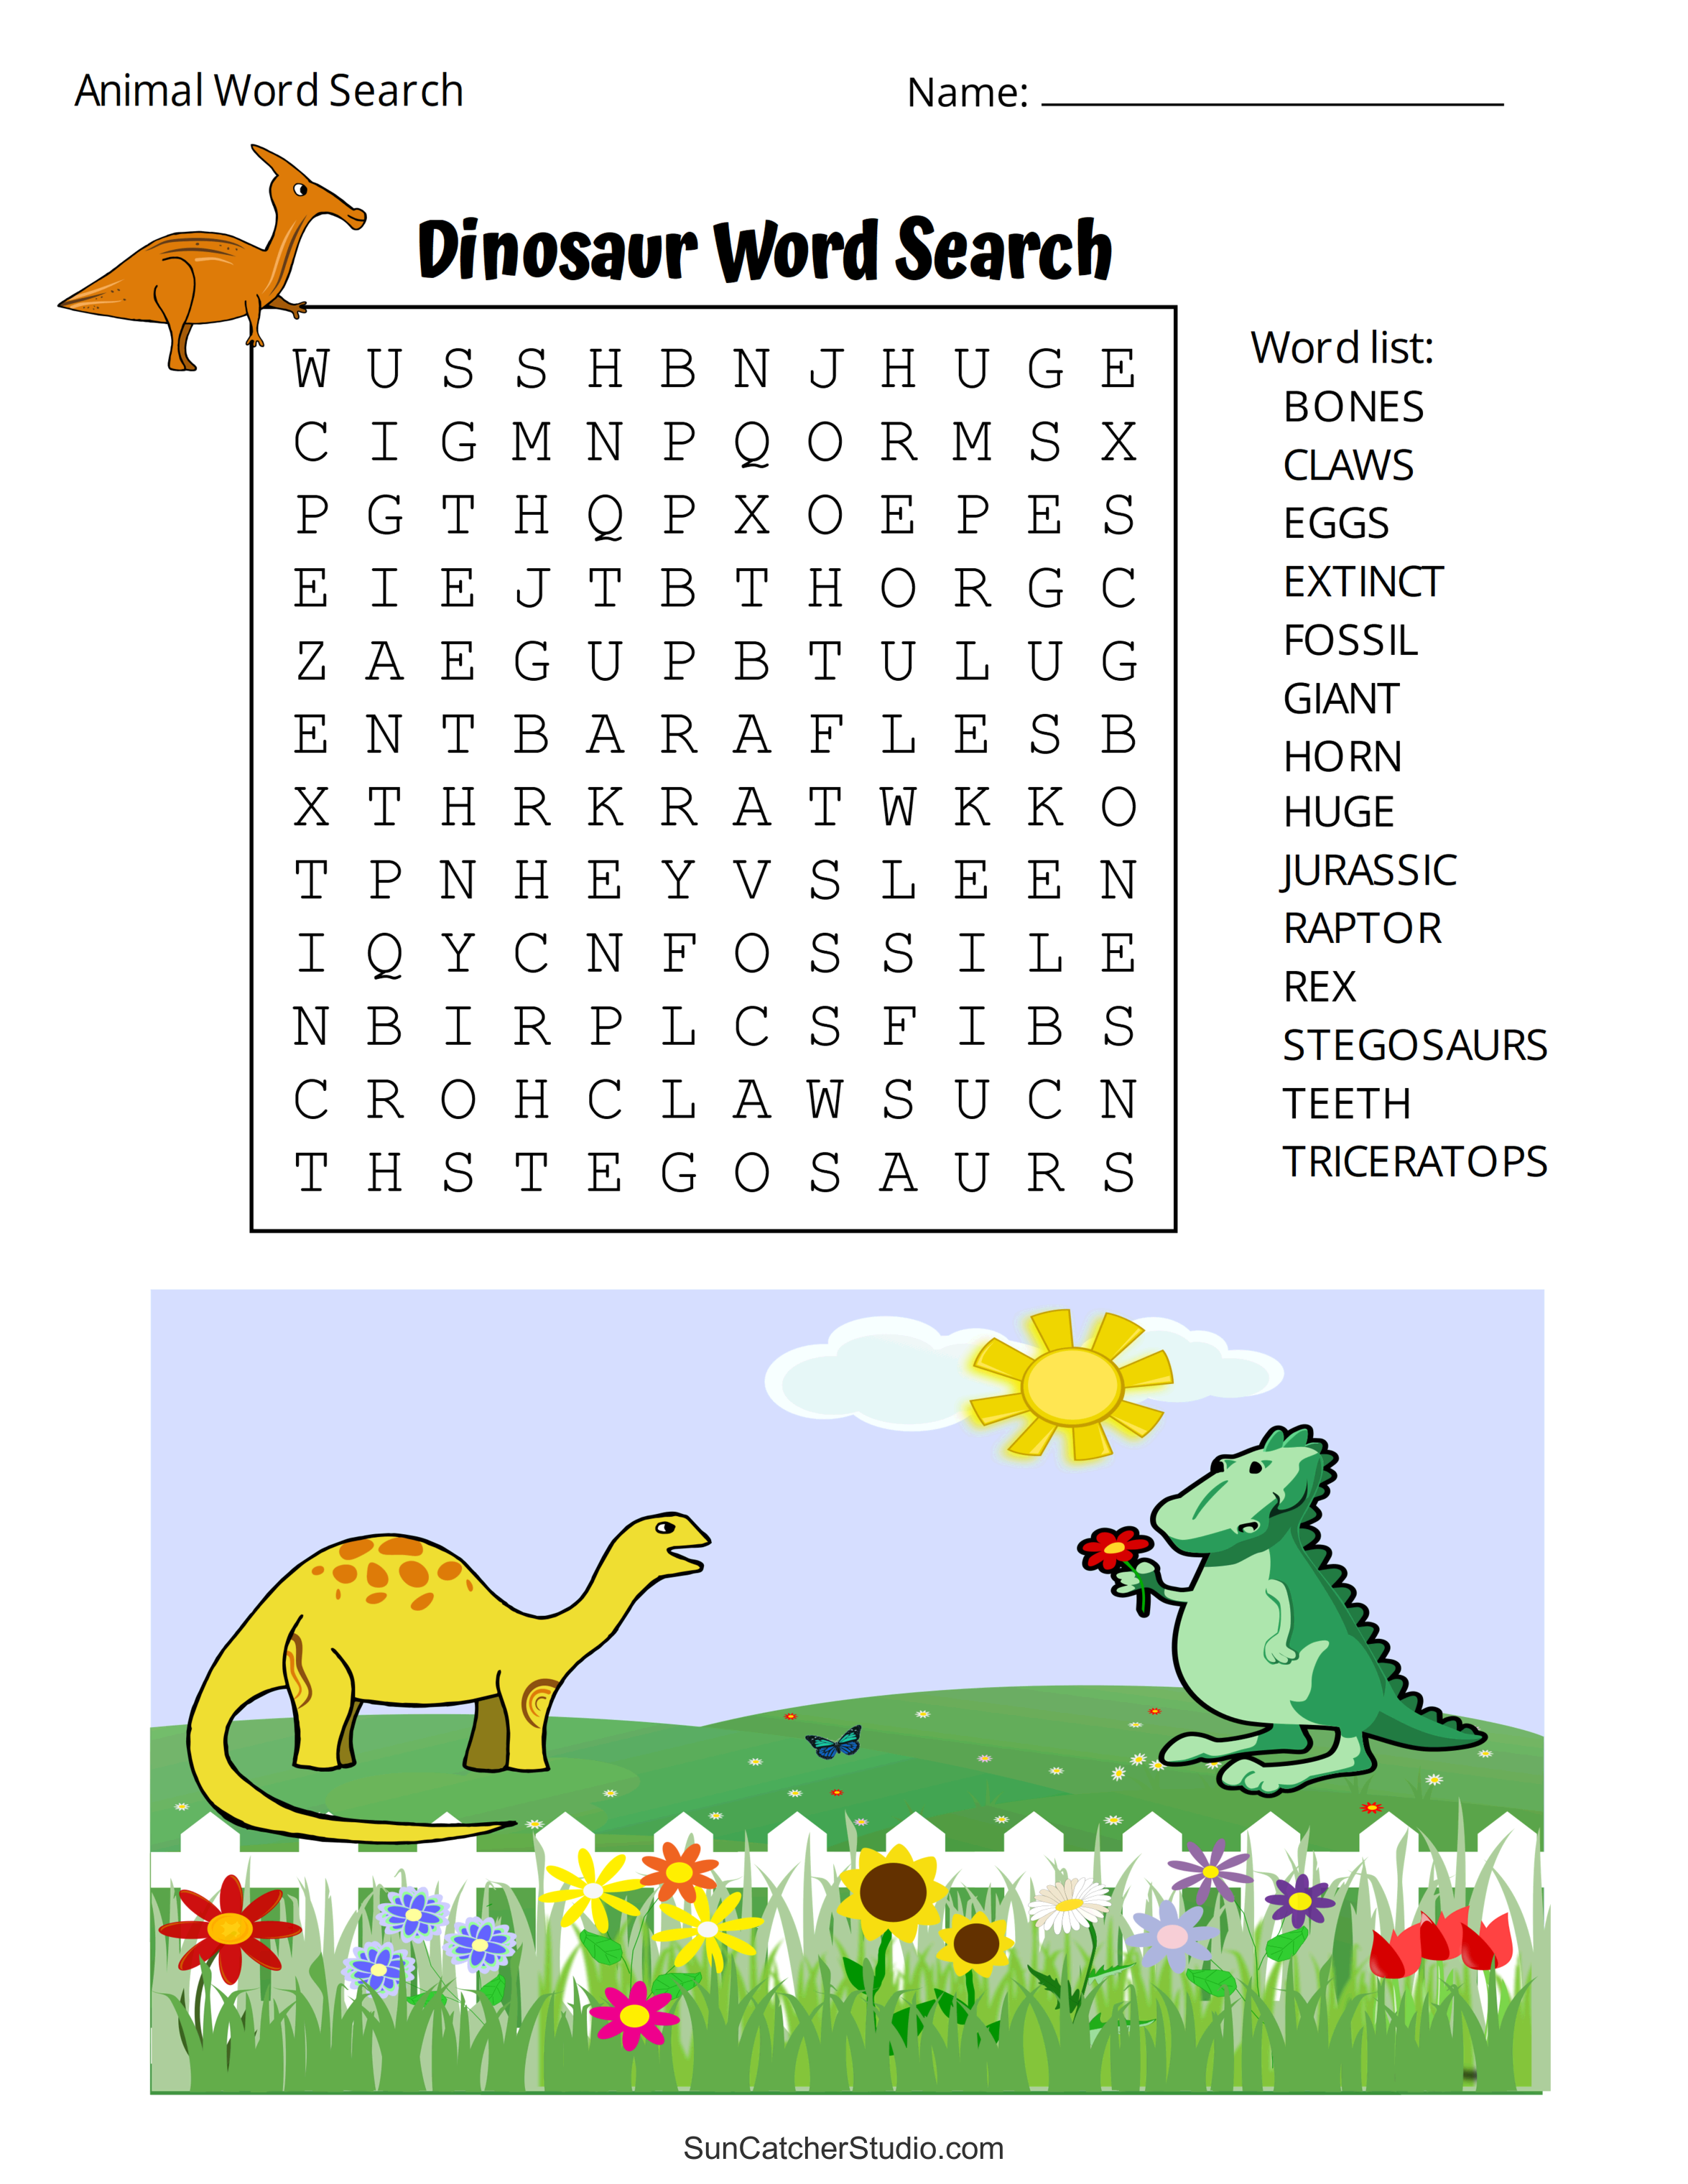 Word Search about Dogs [fun, free printable PDF] - Puzzletainment Publishing